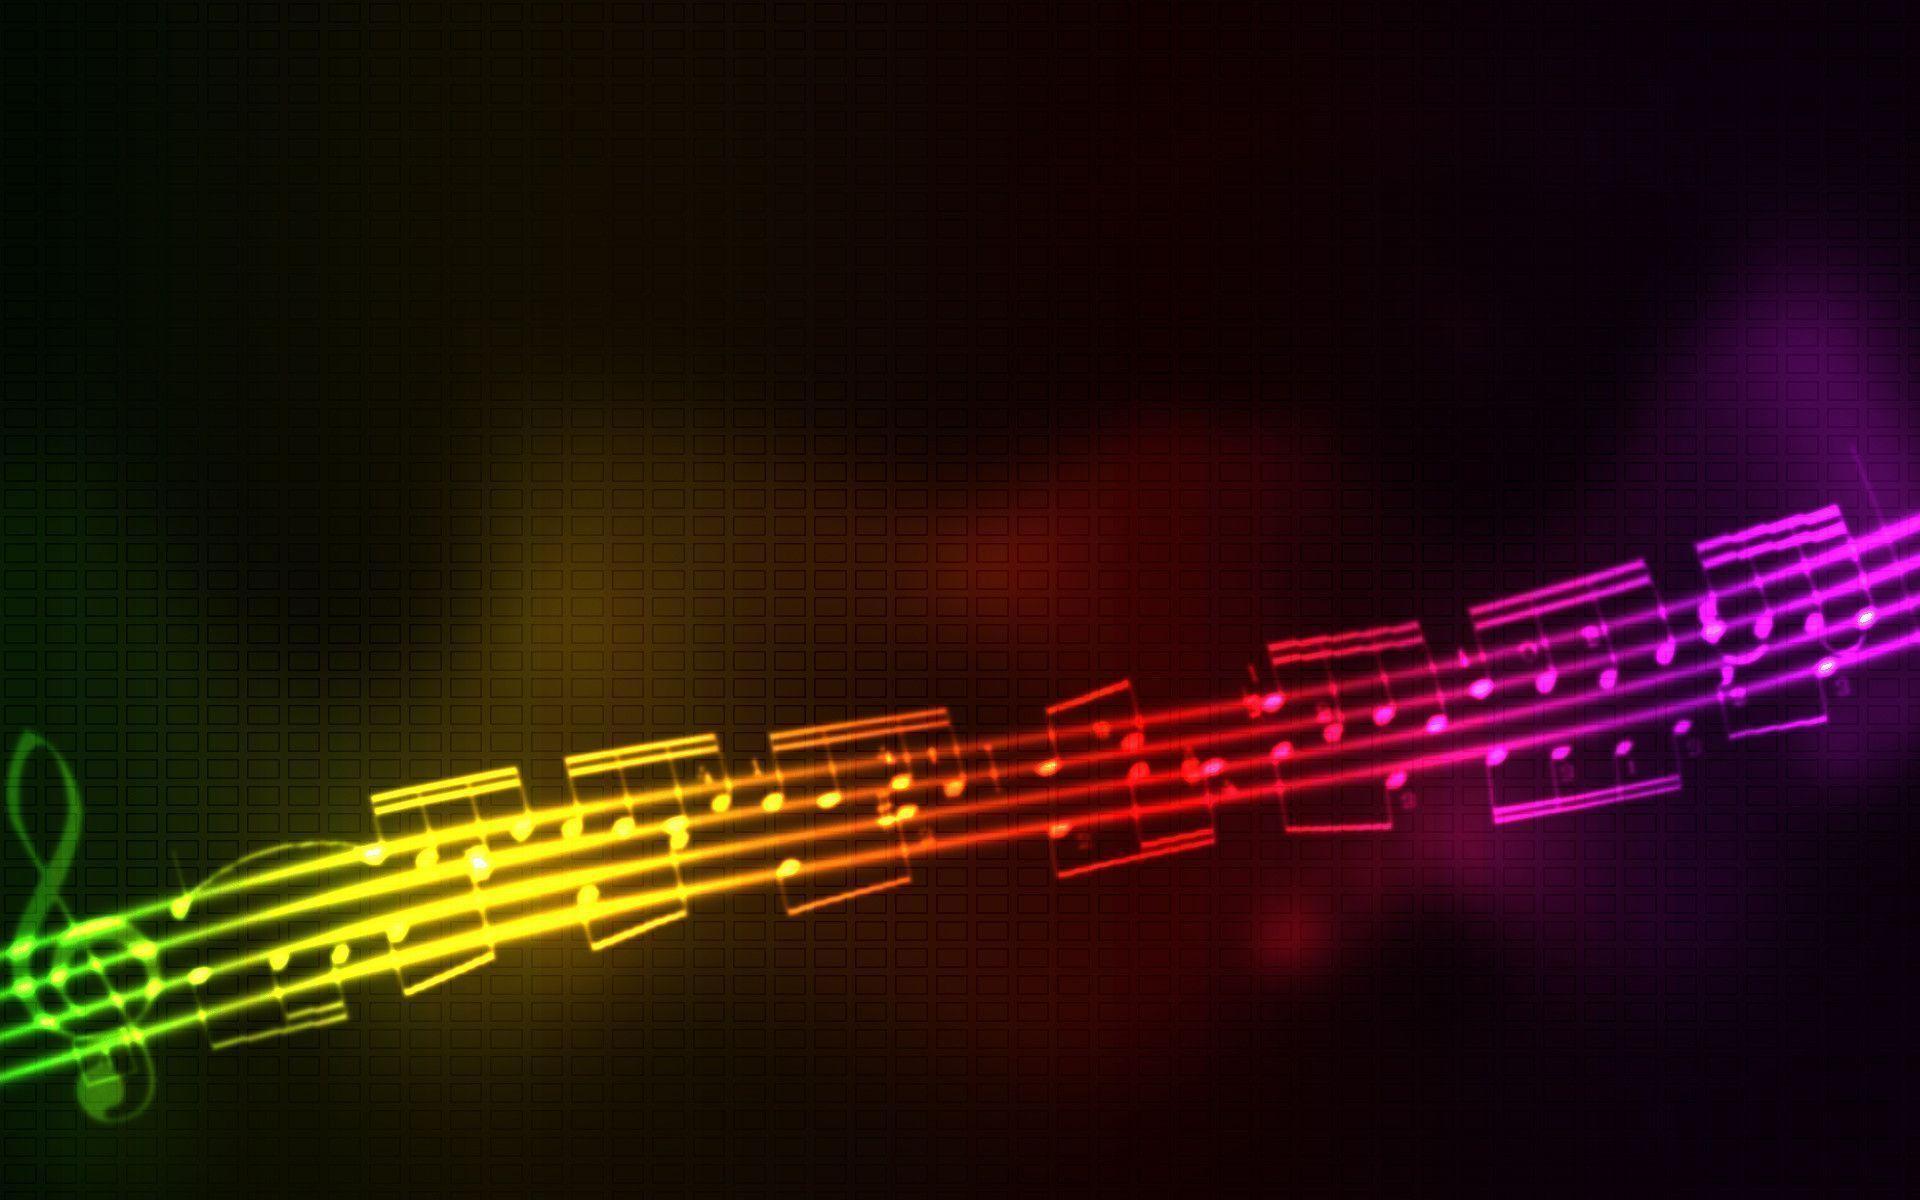 Wallpaper For > Music Abstract Desktop Background